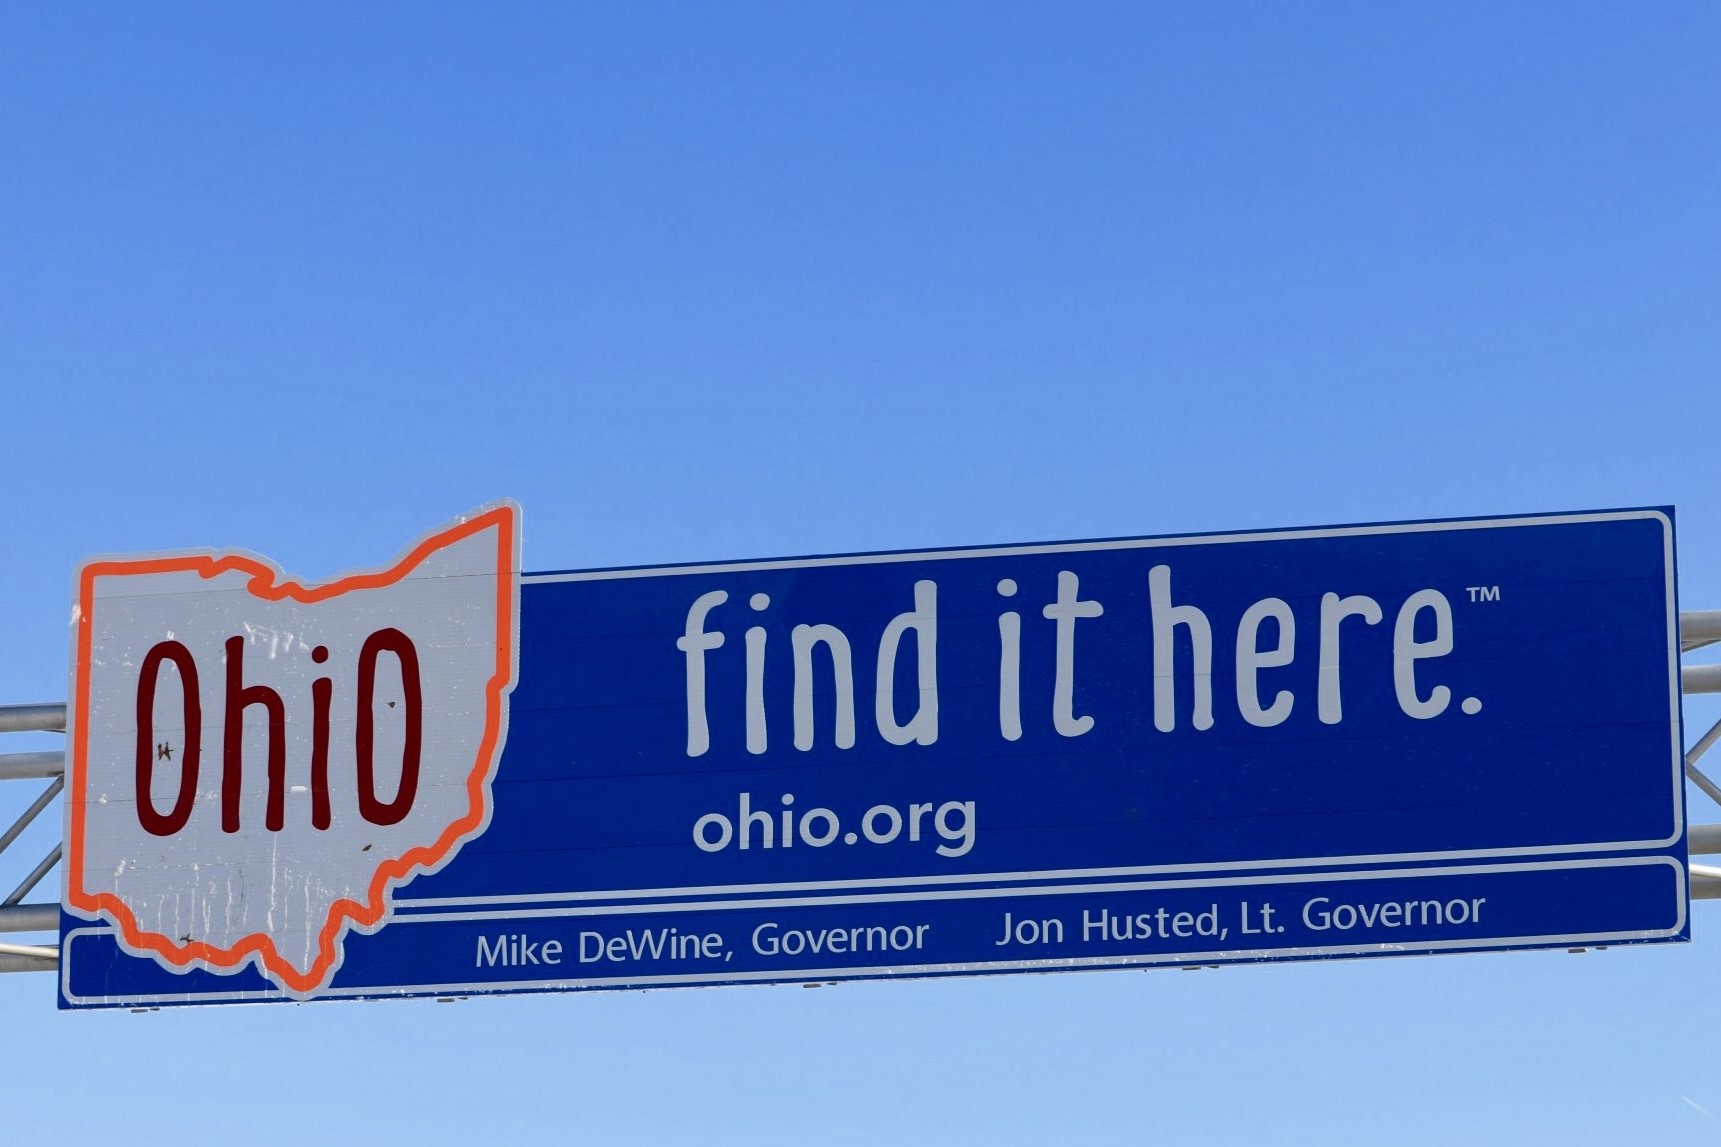 The Shocking Truth Behind Ohio’s Infamous Reputation